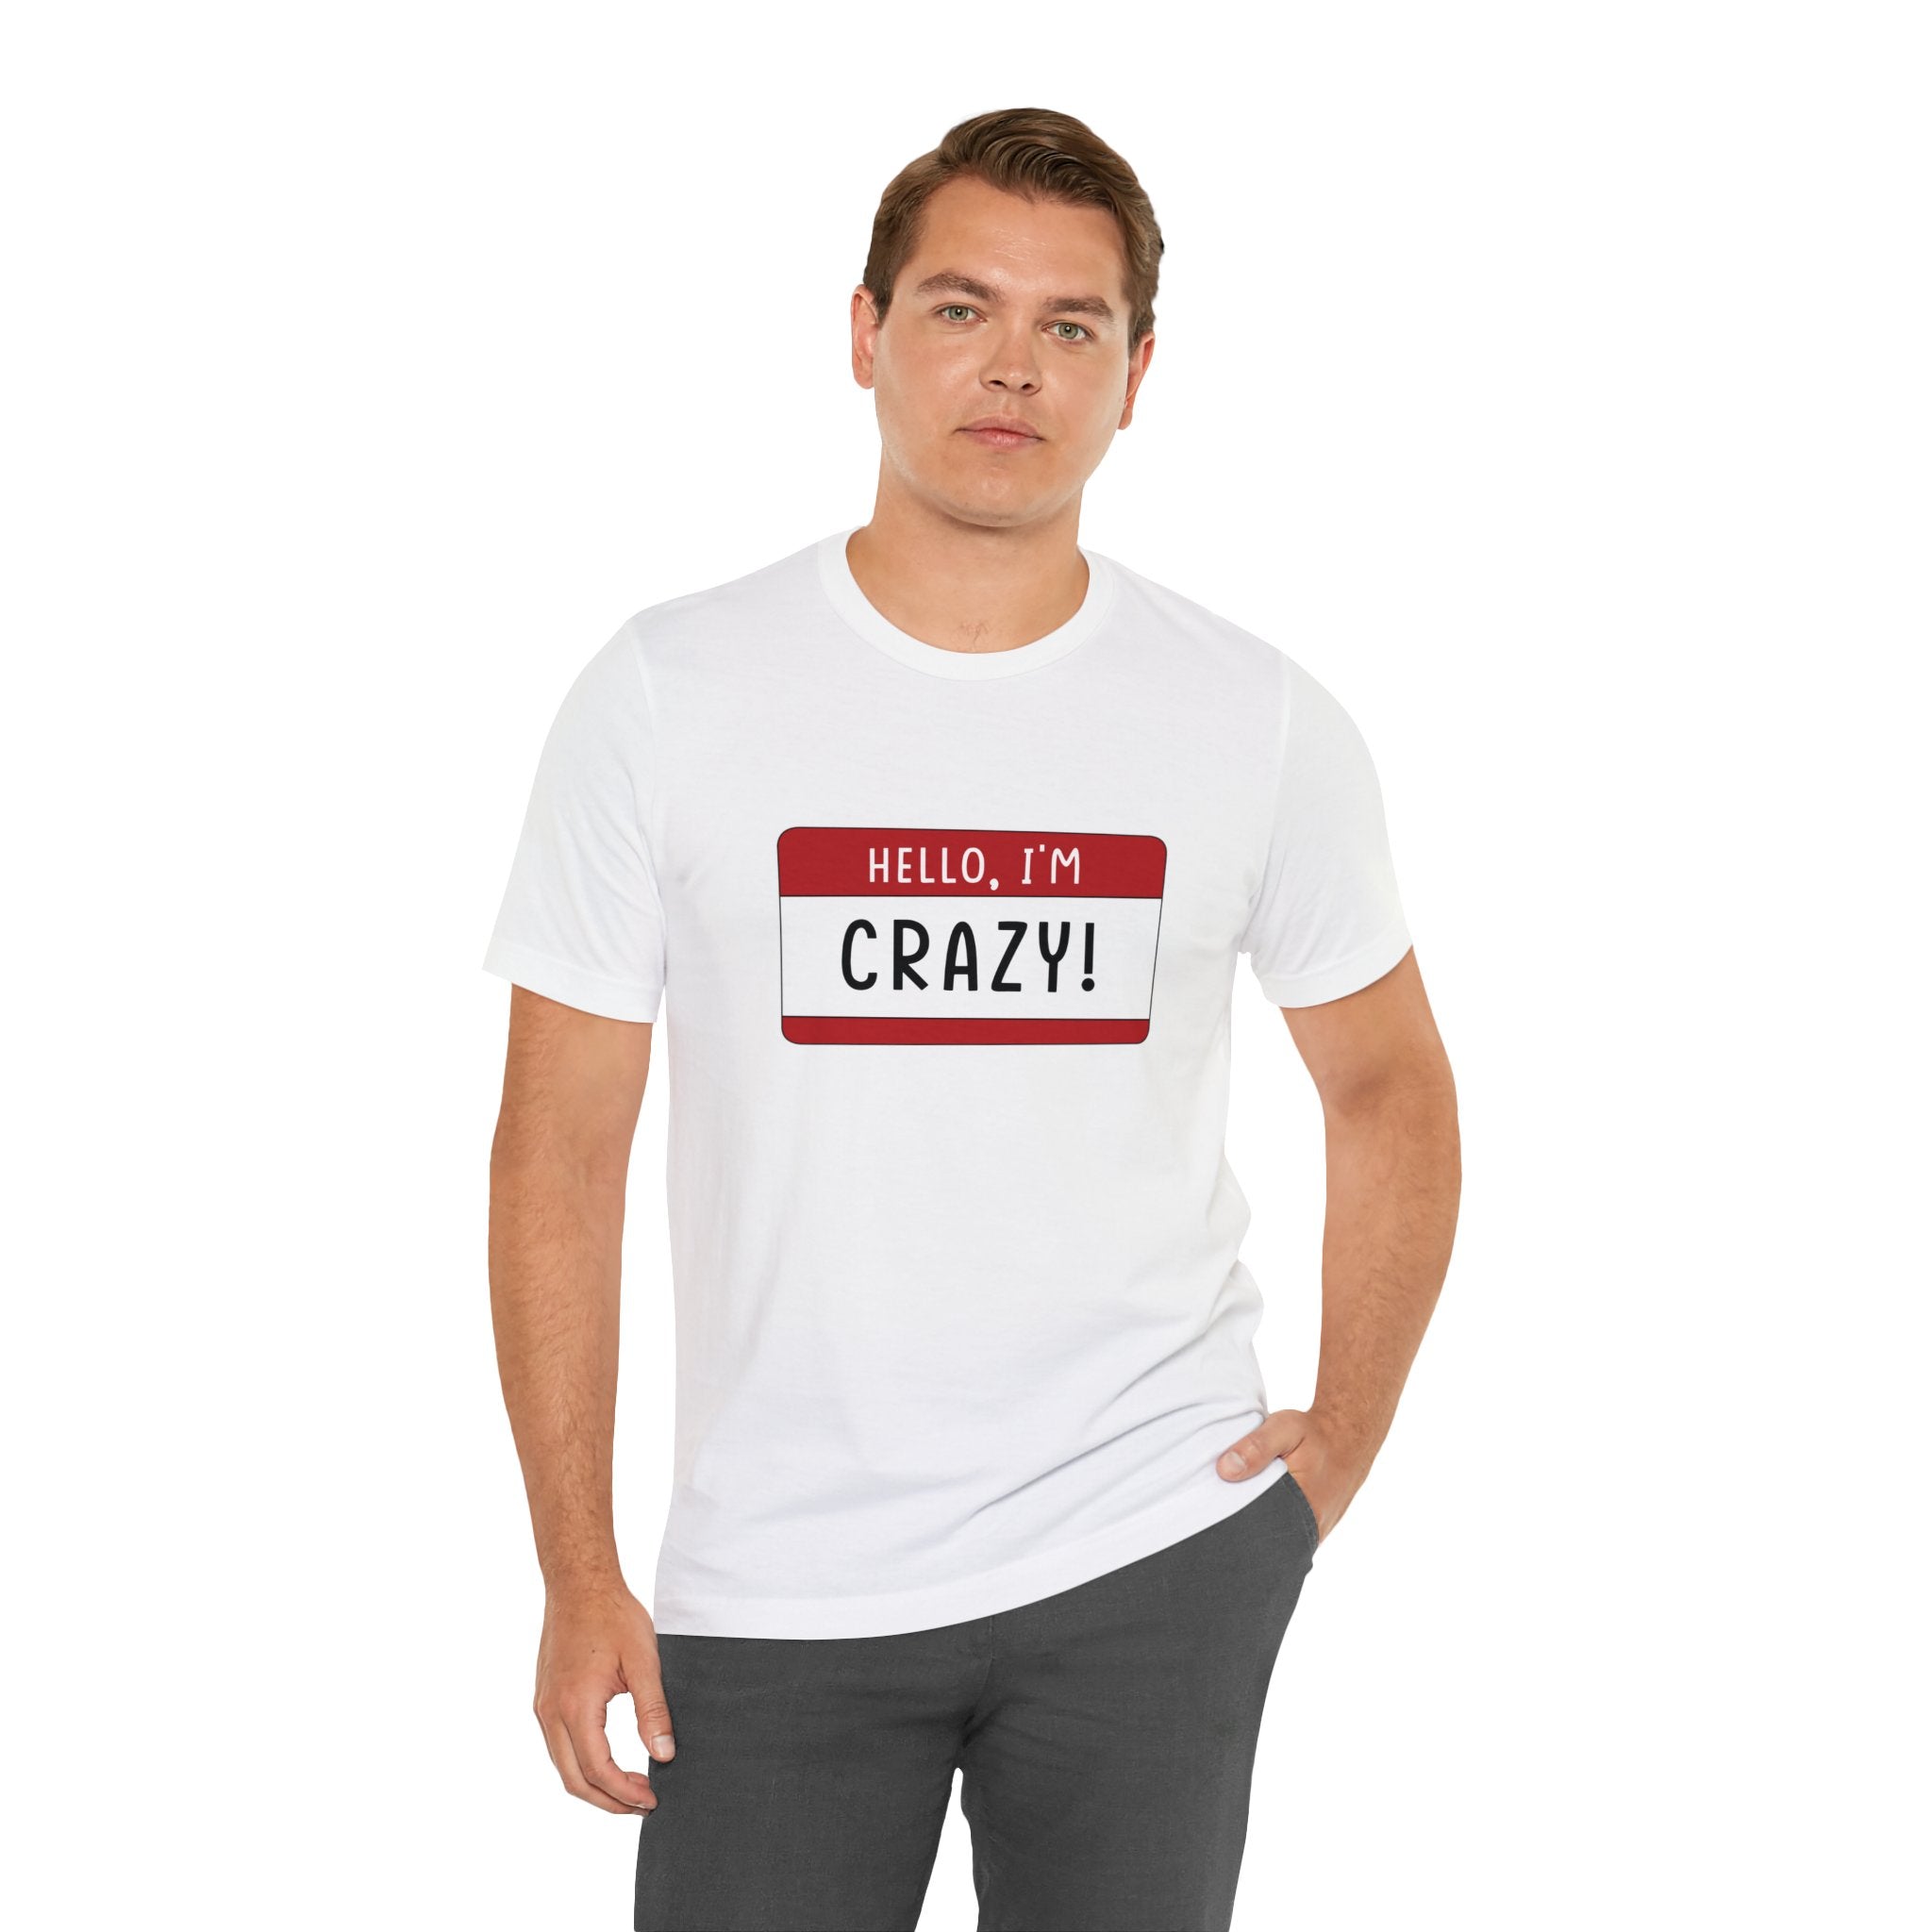 Man wearing a Hello, I'm CRAZY T-Shirt with a unique red name tag design that reads "hello, I'm crazy!" standing against a white background.